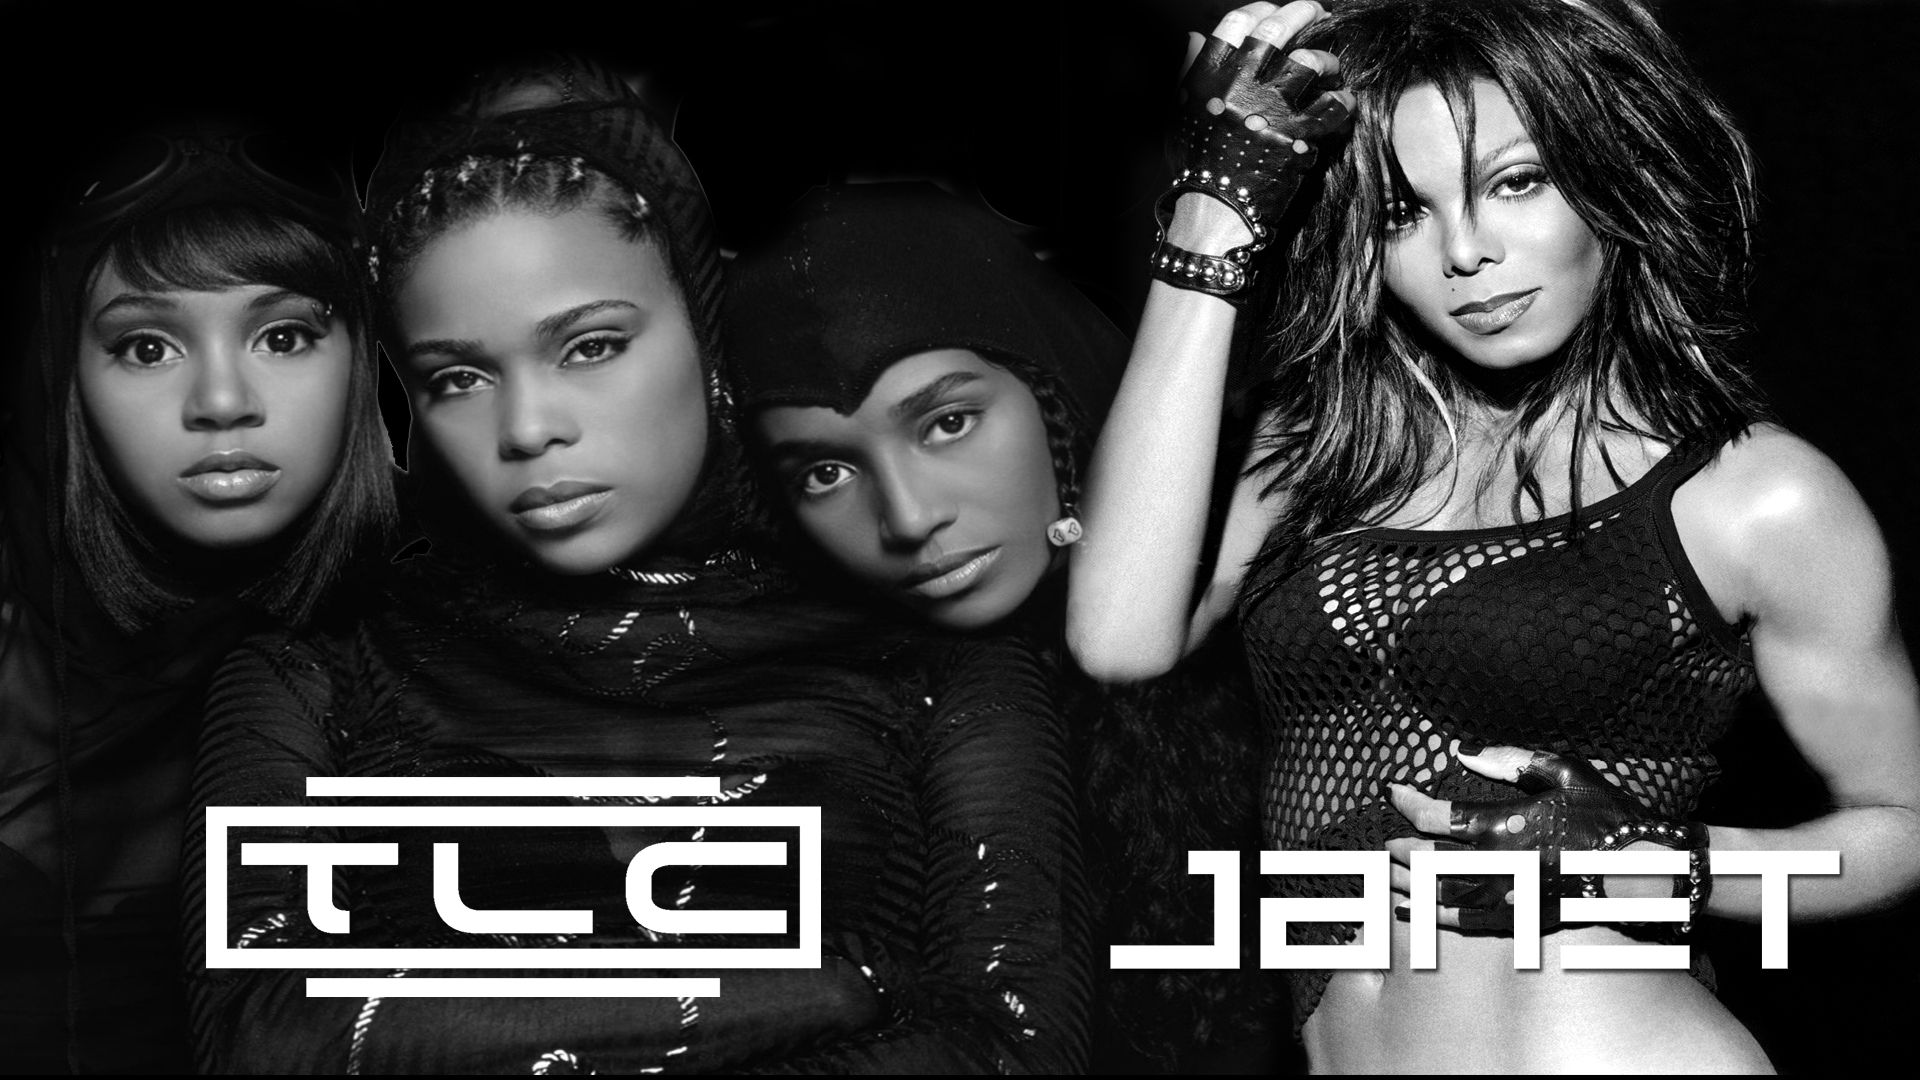 Janet Jackson and TLC - Wallpaper by lustrious-zombies on DeviantArt